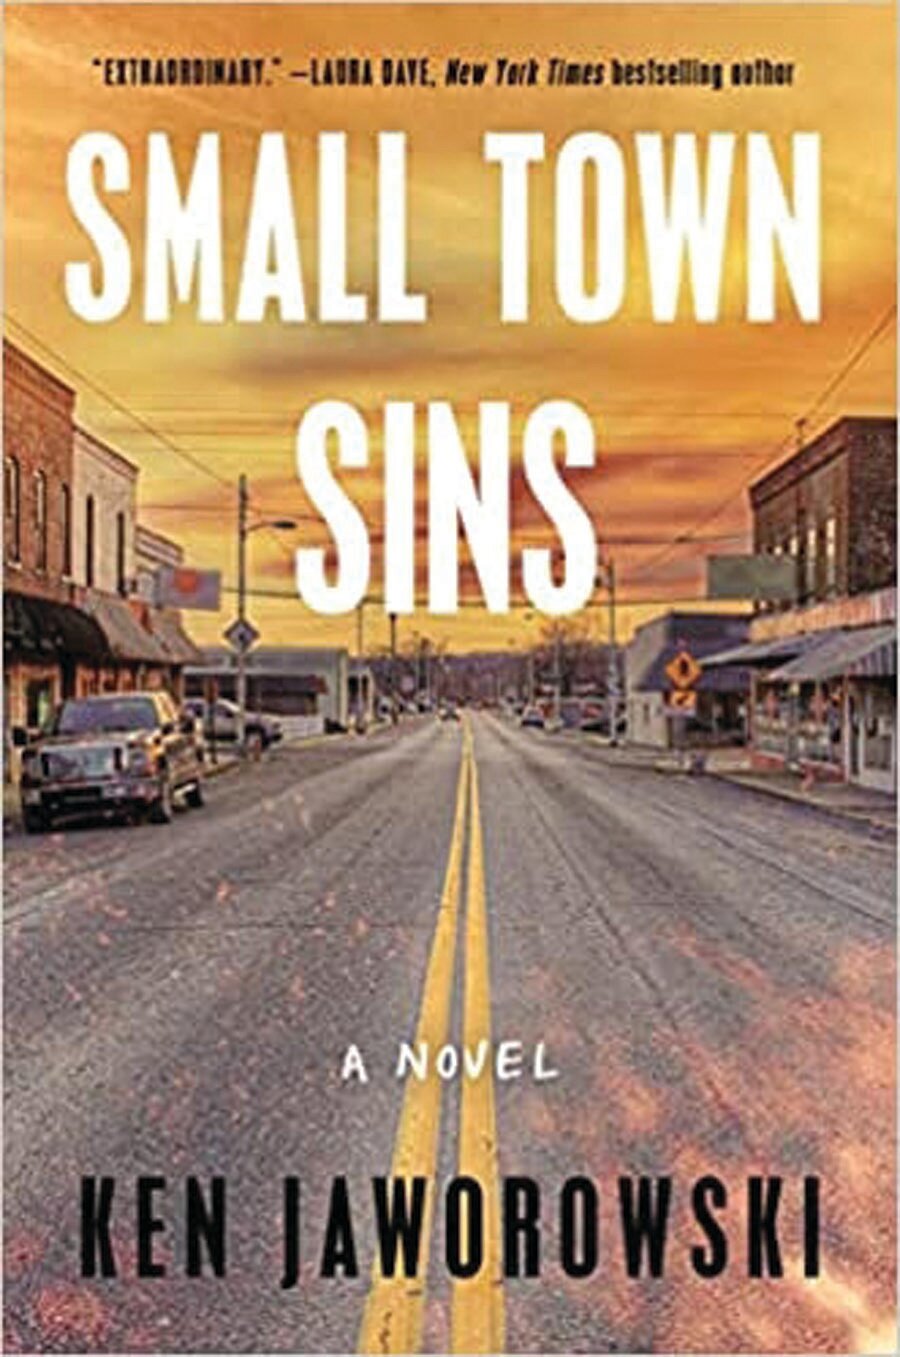 A local playwright and theater critic’s novel is set in a fictional Pennsylvania town.